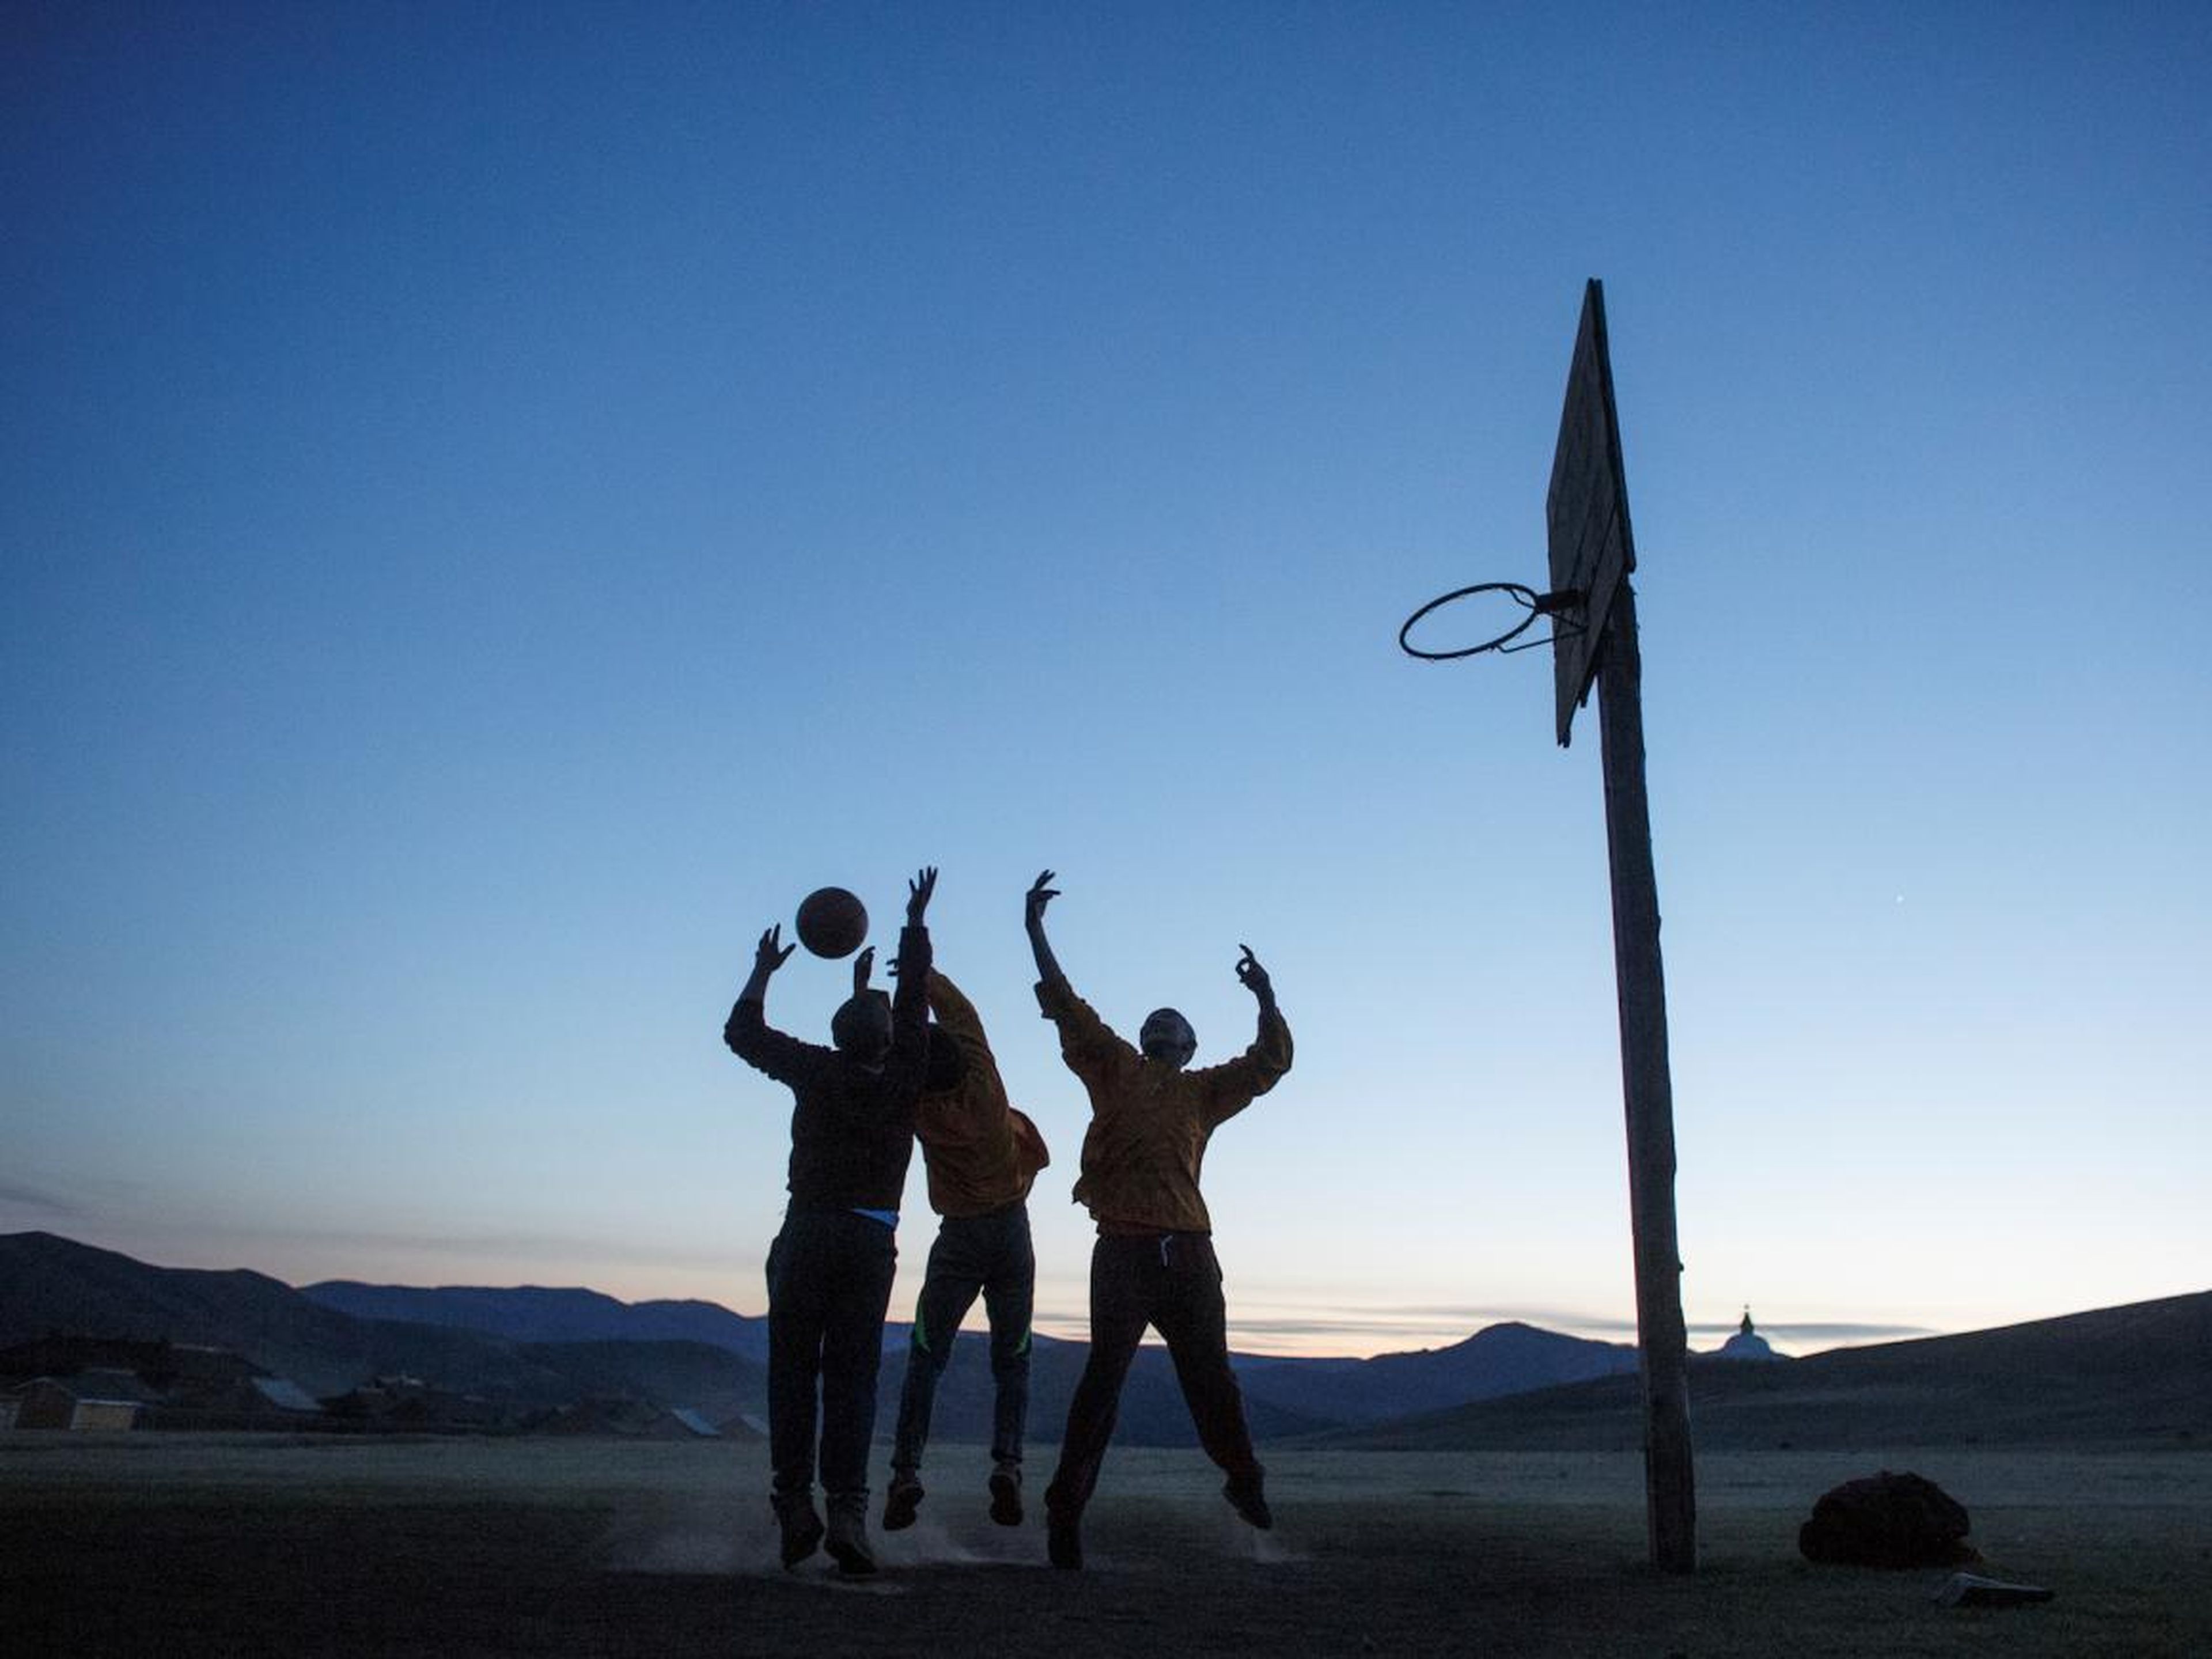 Monks at the monastery wind down by playing basketball at sunset …